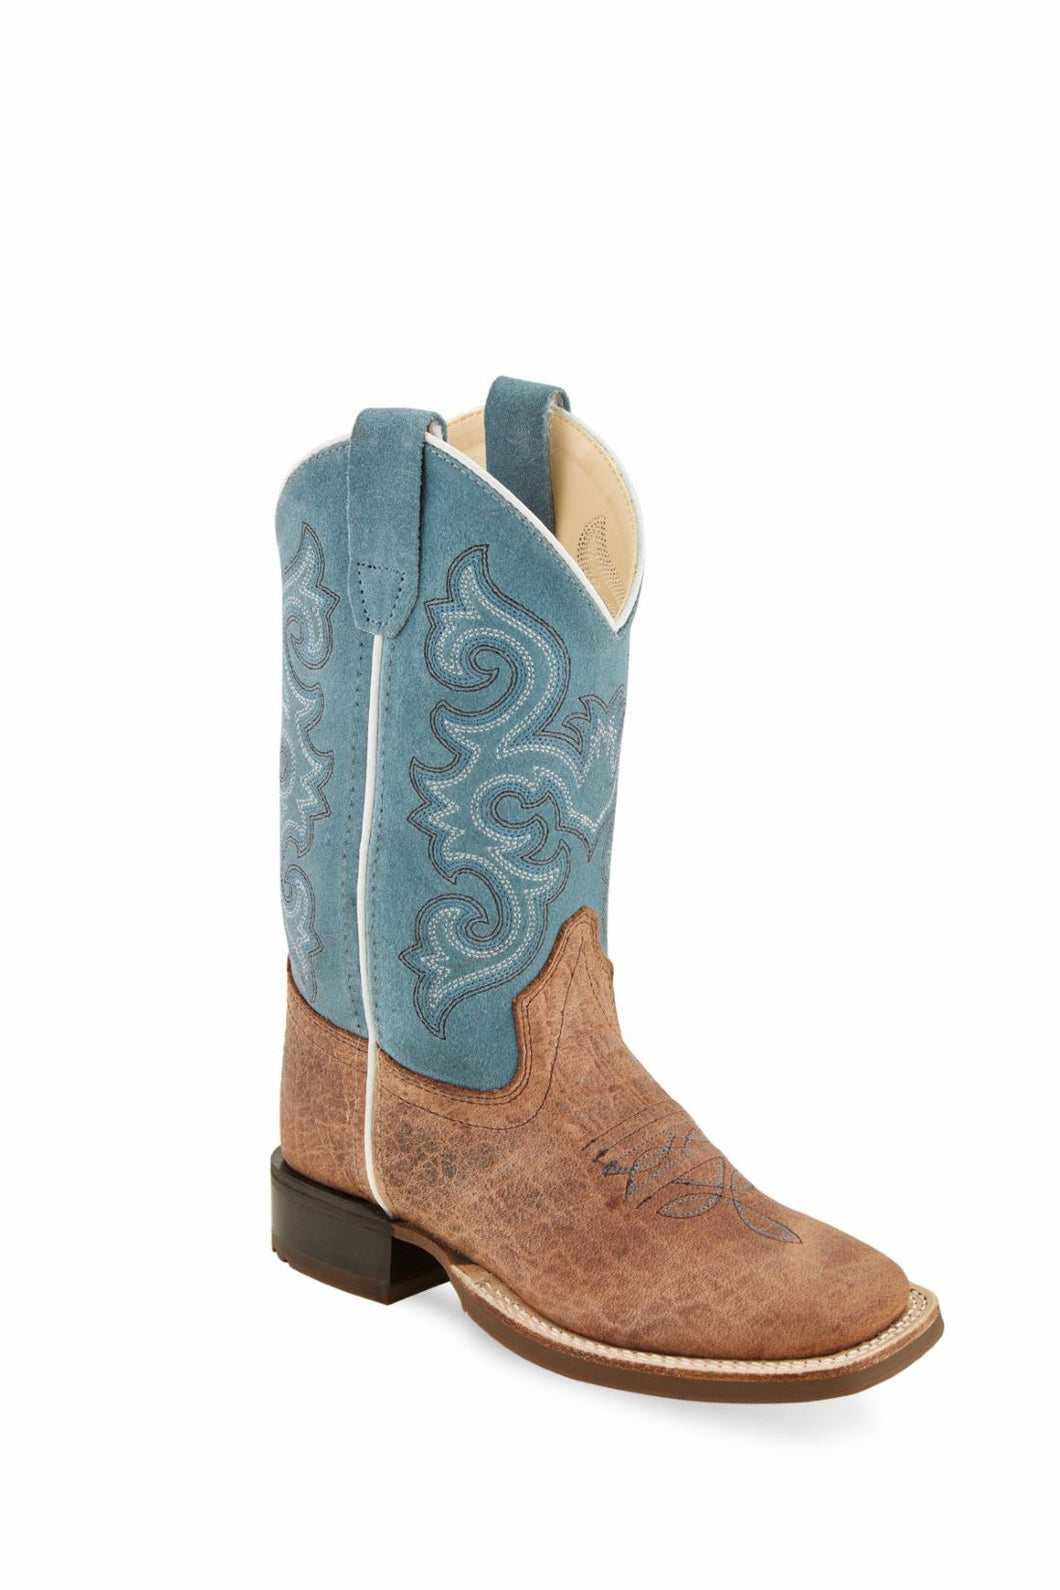 'Old West' Children's Western Square Toe - Brown / Sky Blue